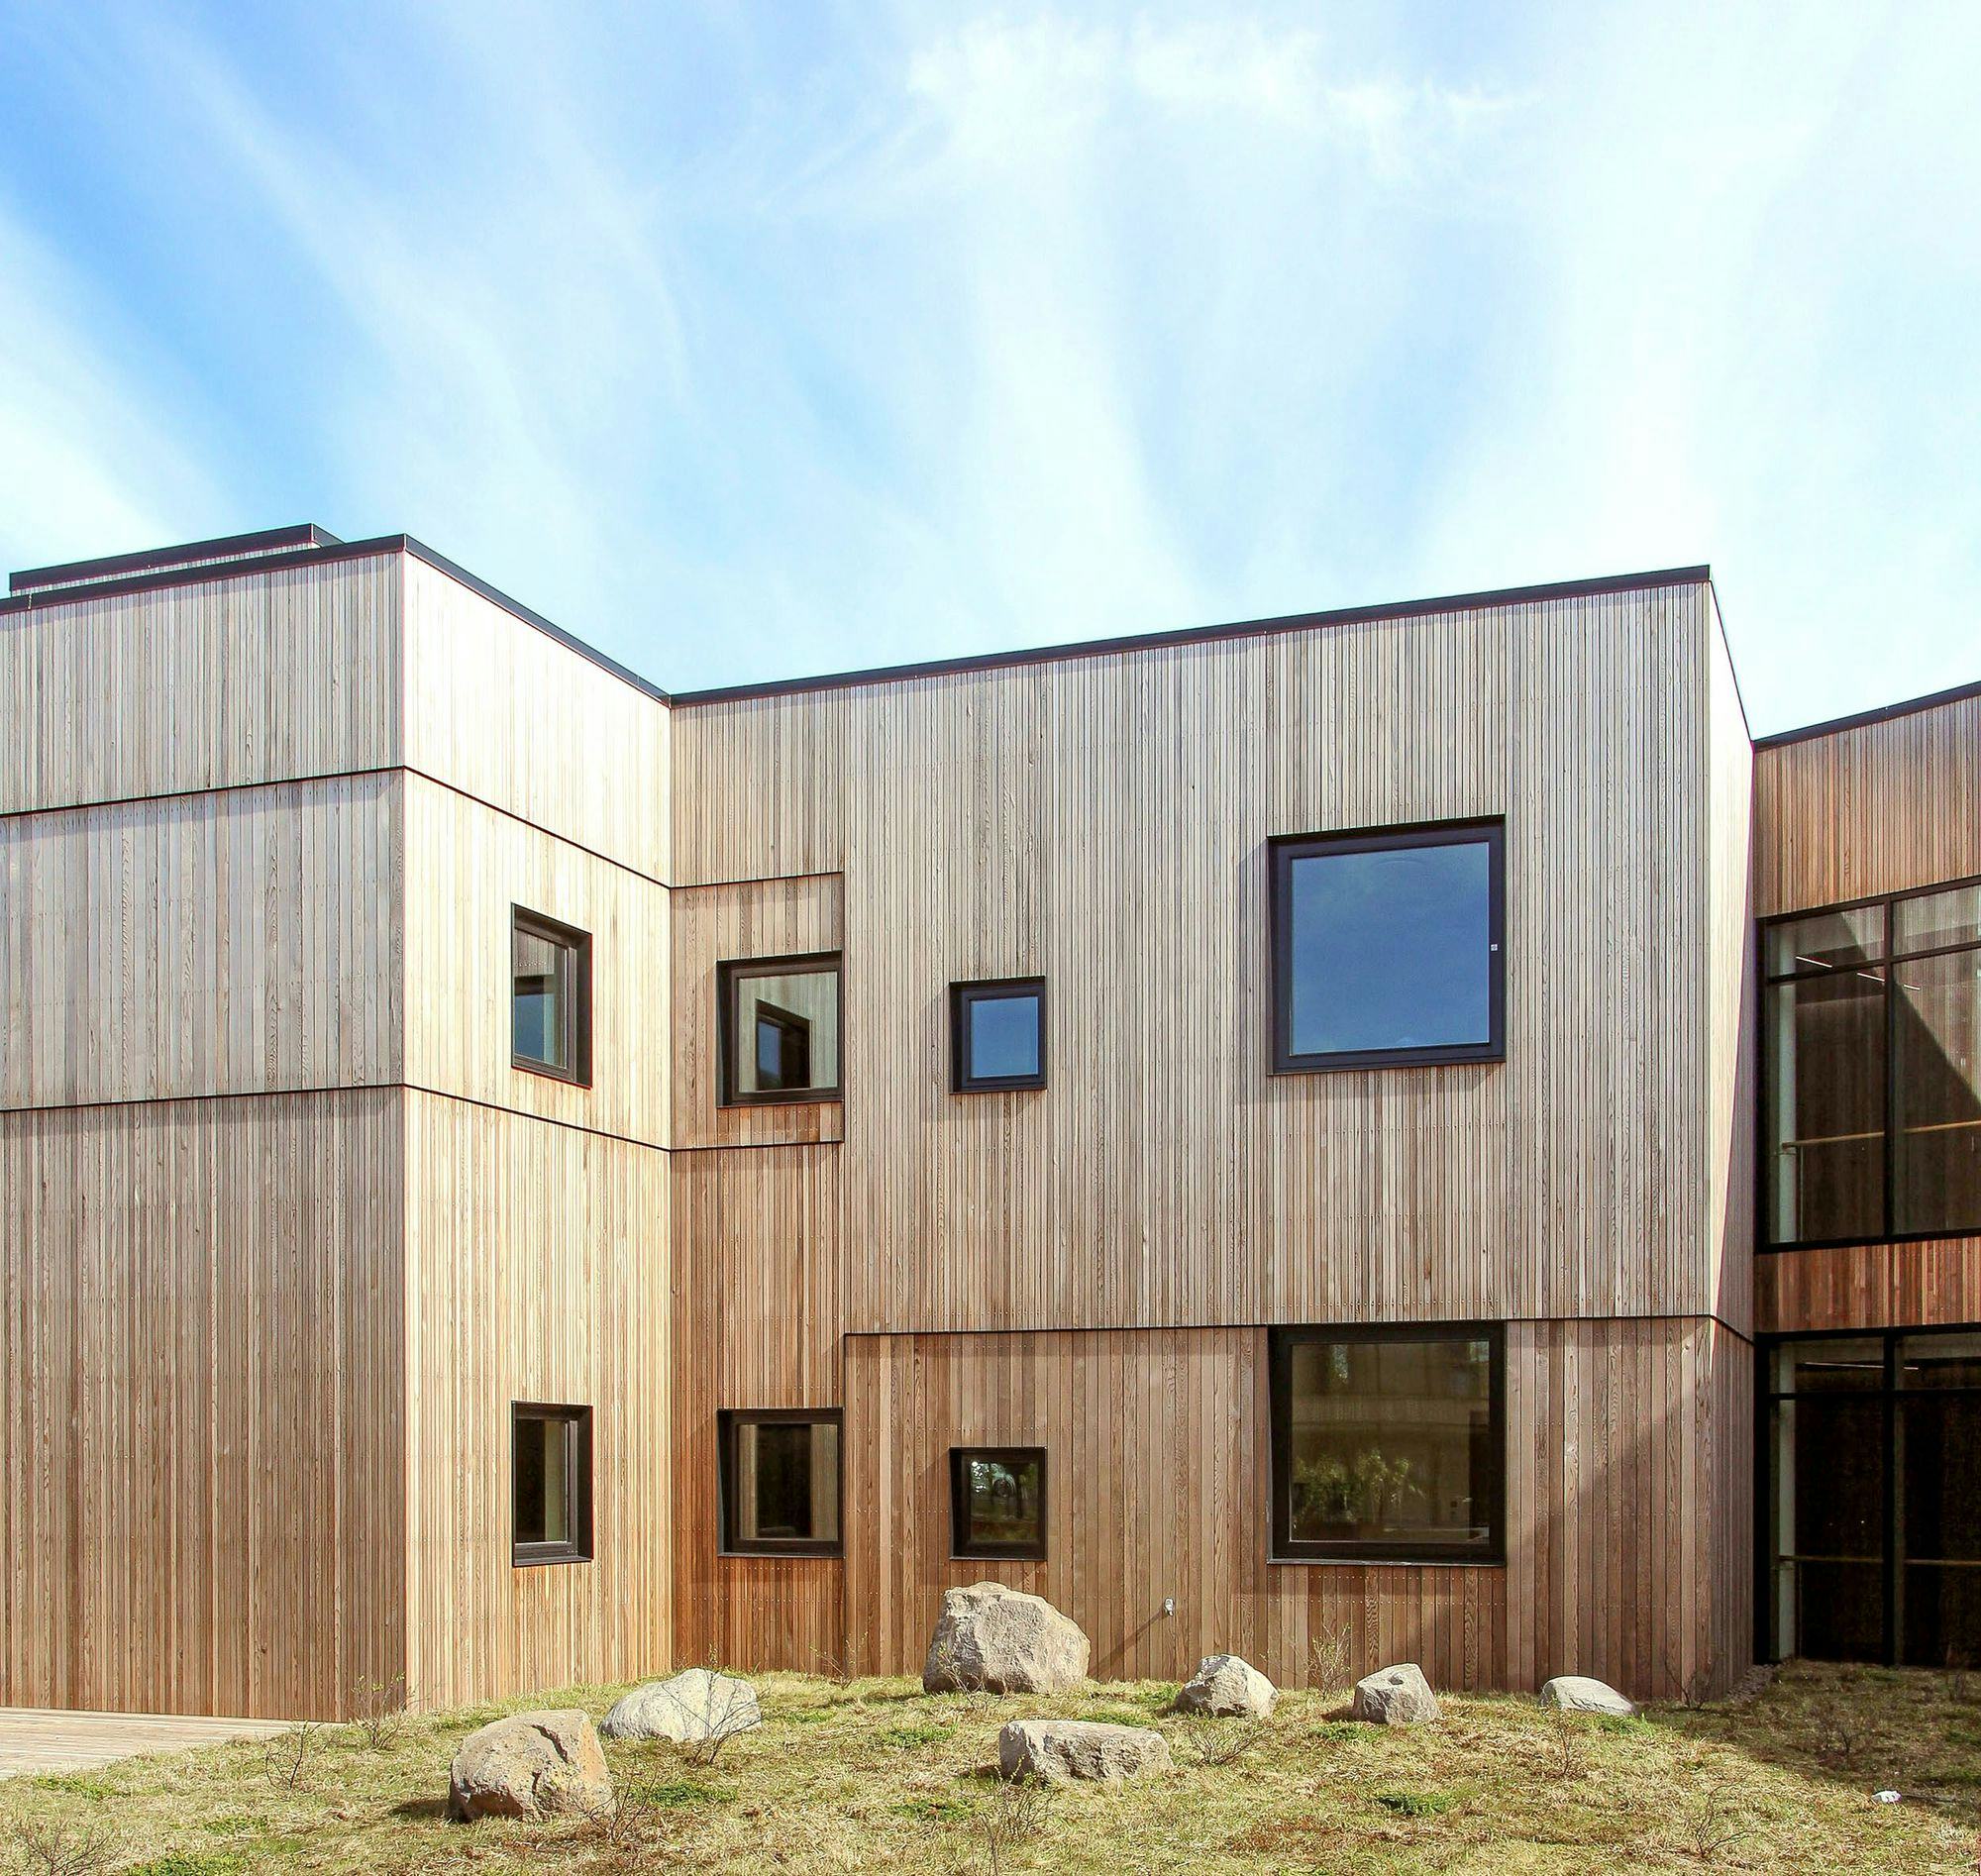 A wooden clad building with various sized windows